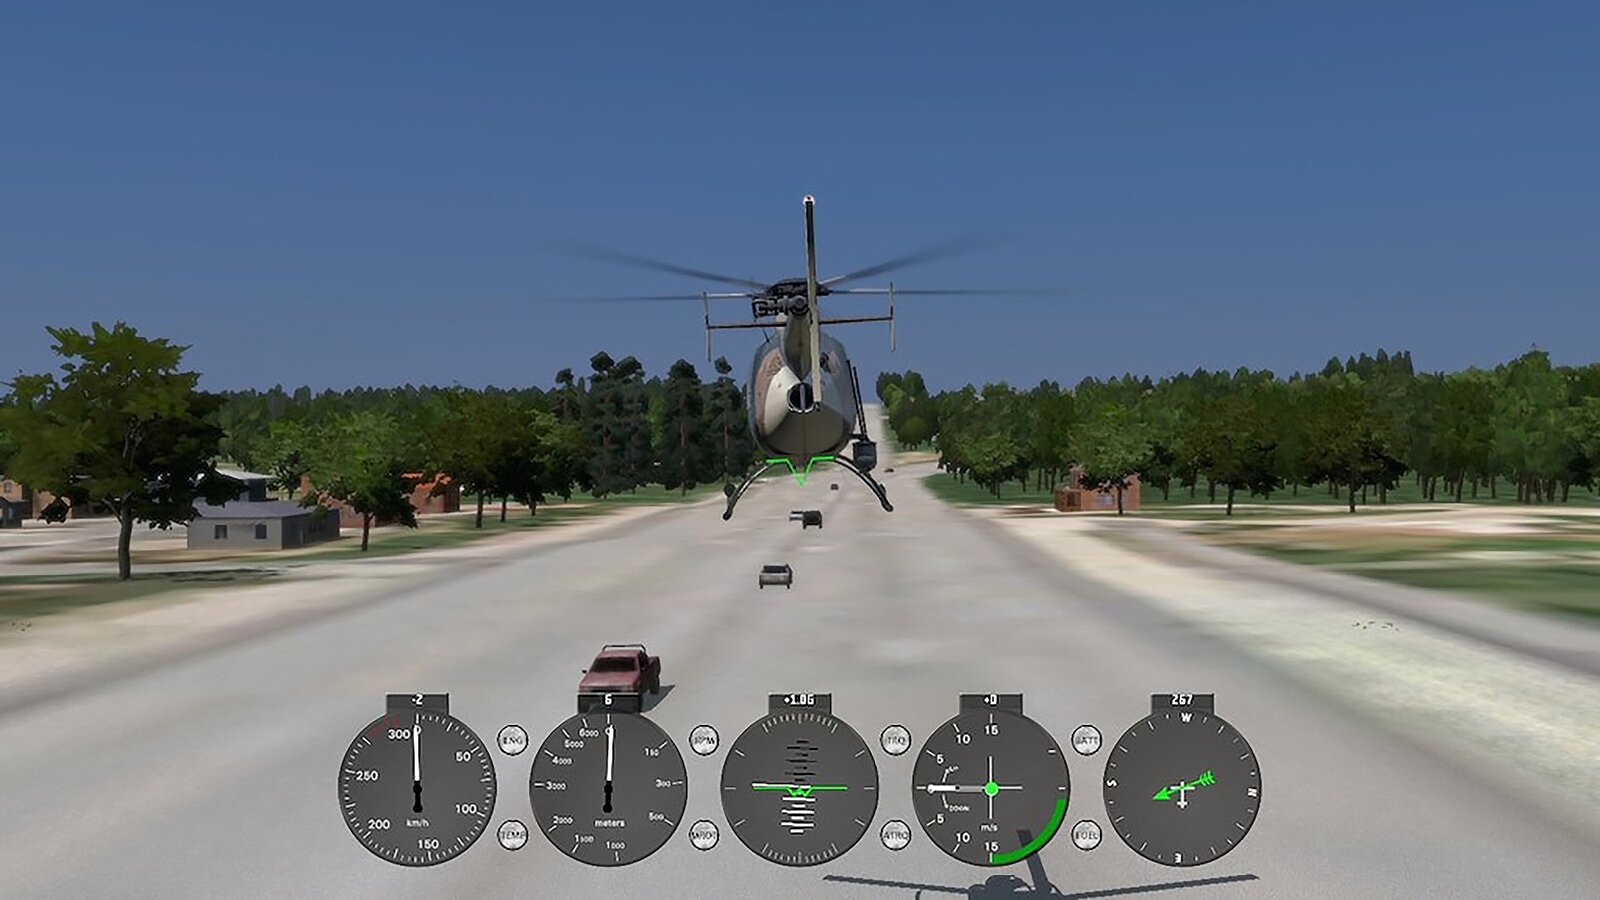 Take On Helicopters